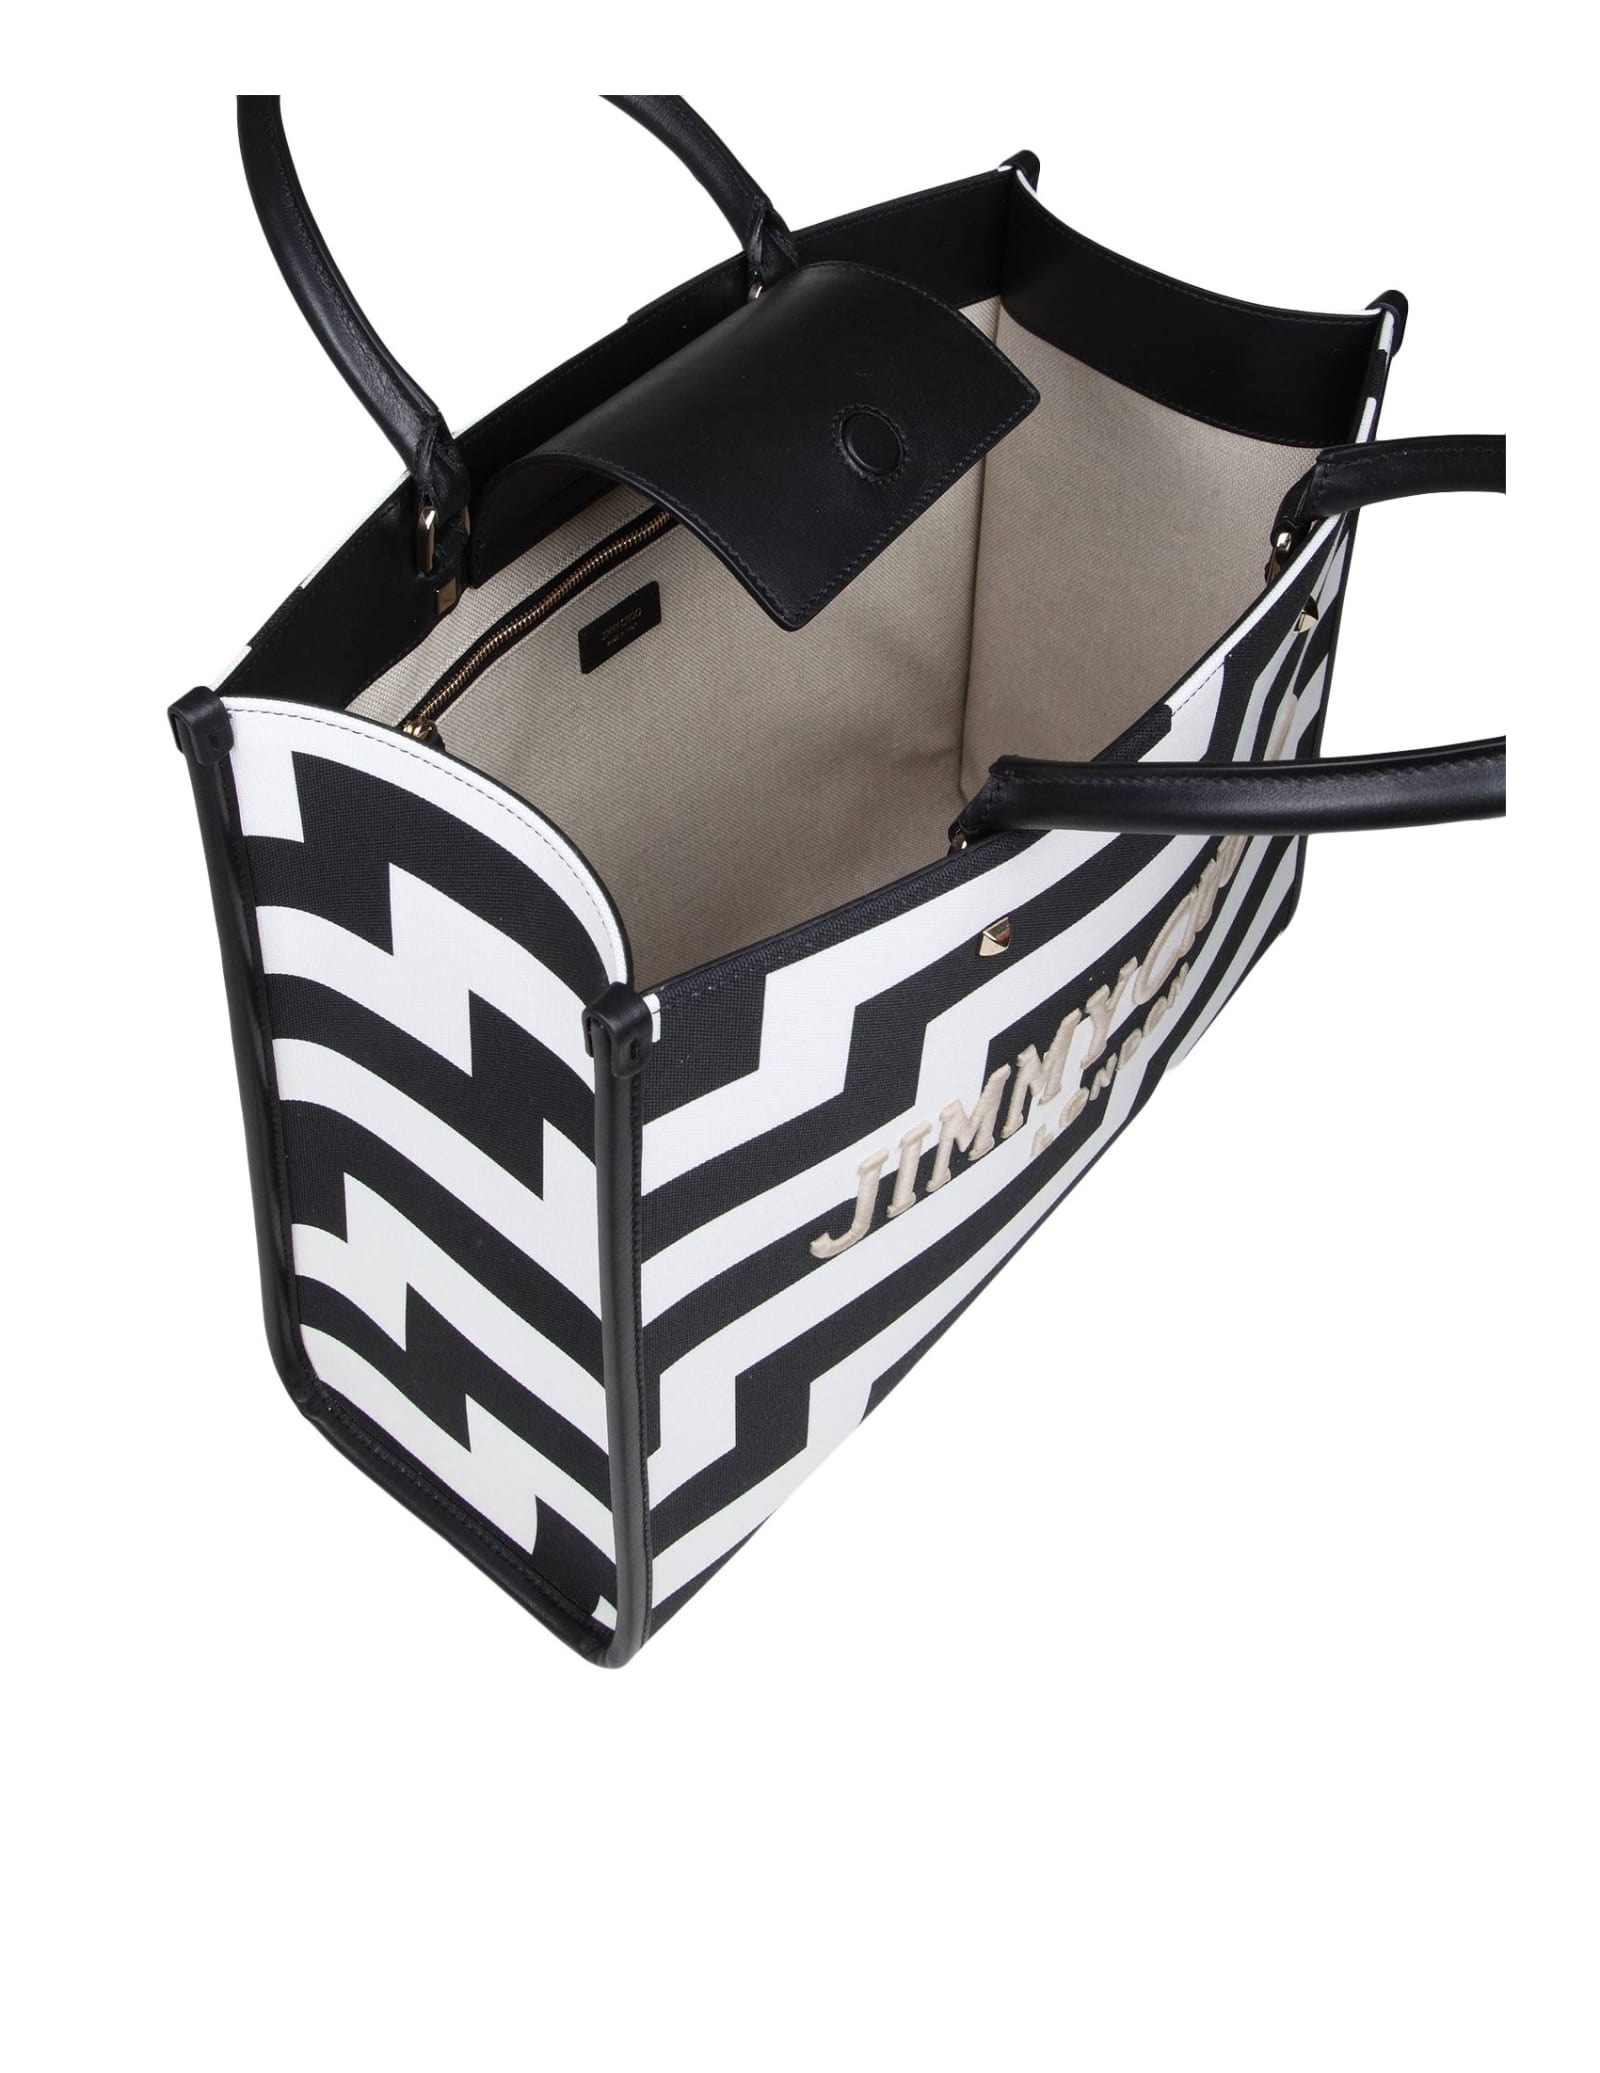 Shop Jimmy Choo Avenue M Black And White Canvas And Leather Tote In Black/white